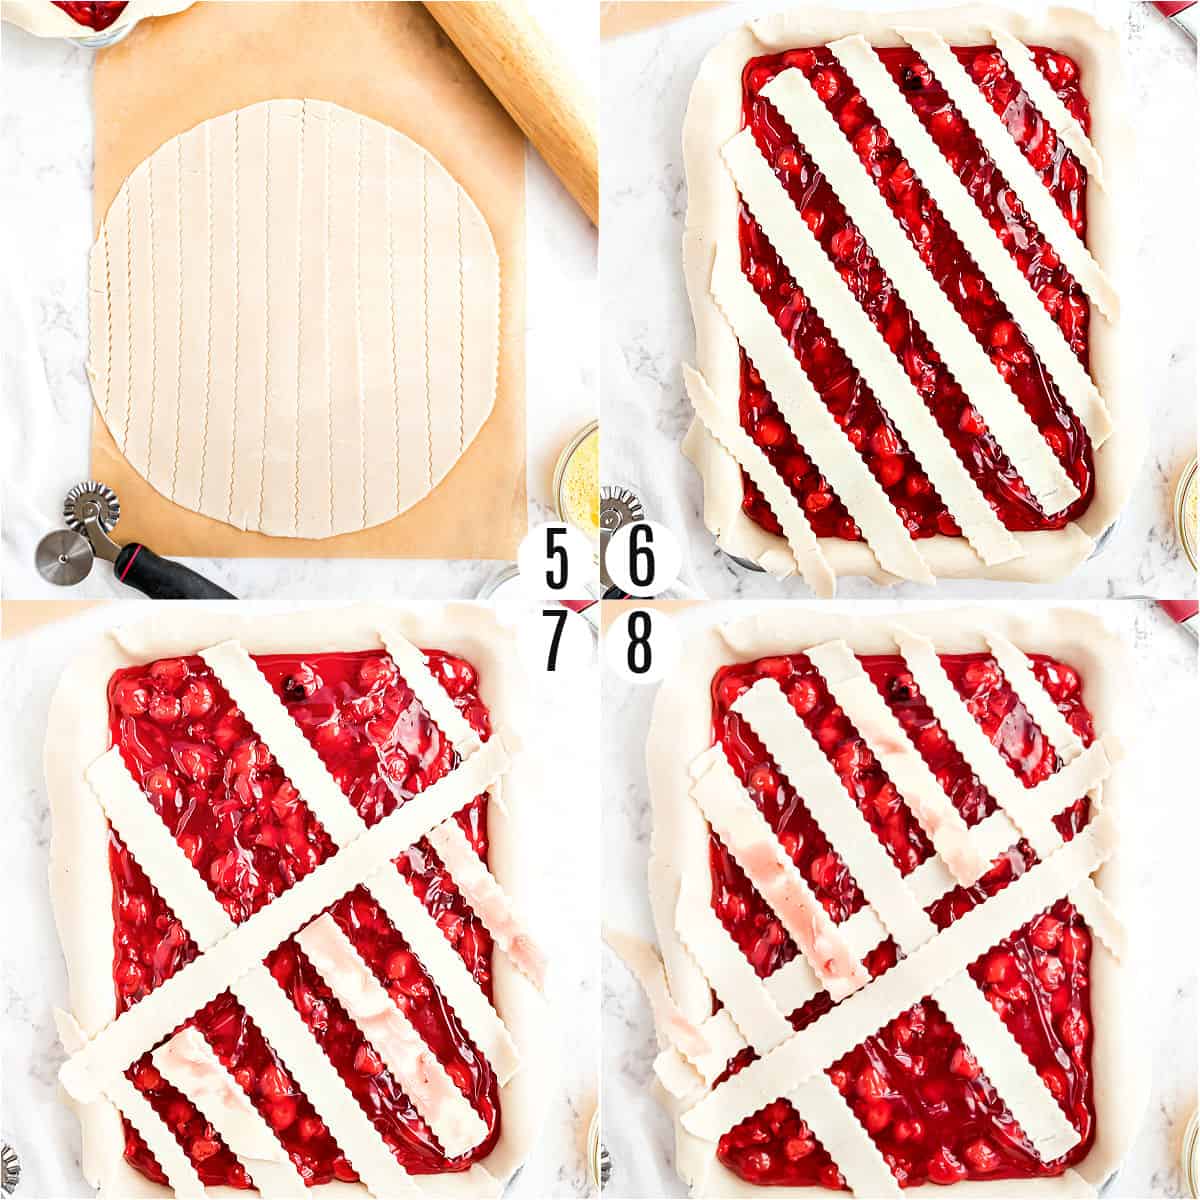 Step by step photos showing how to make a lattice topping for sheet pan pie.